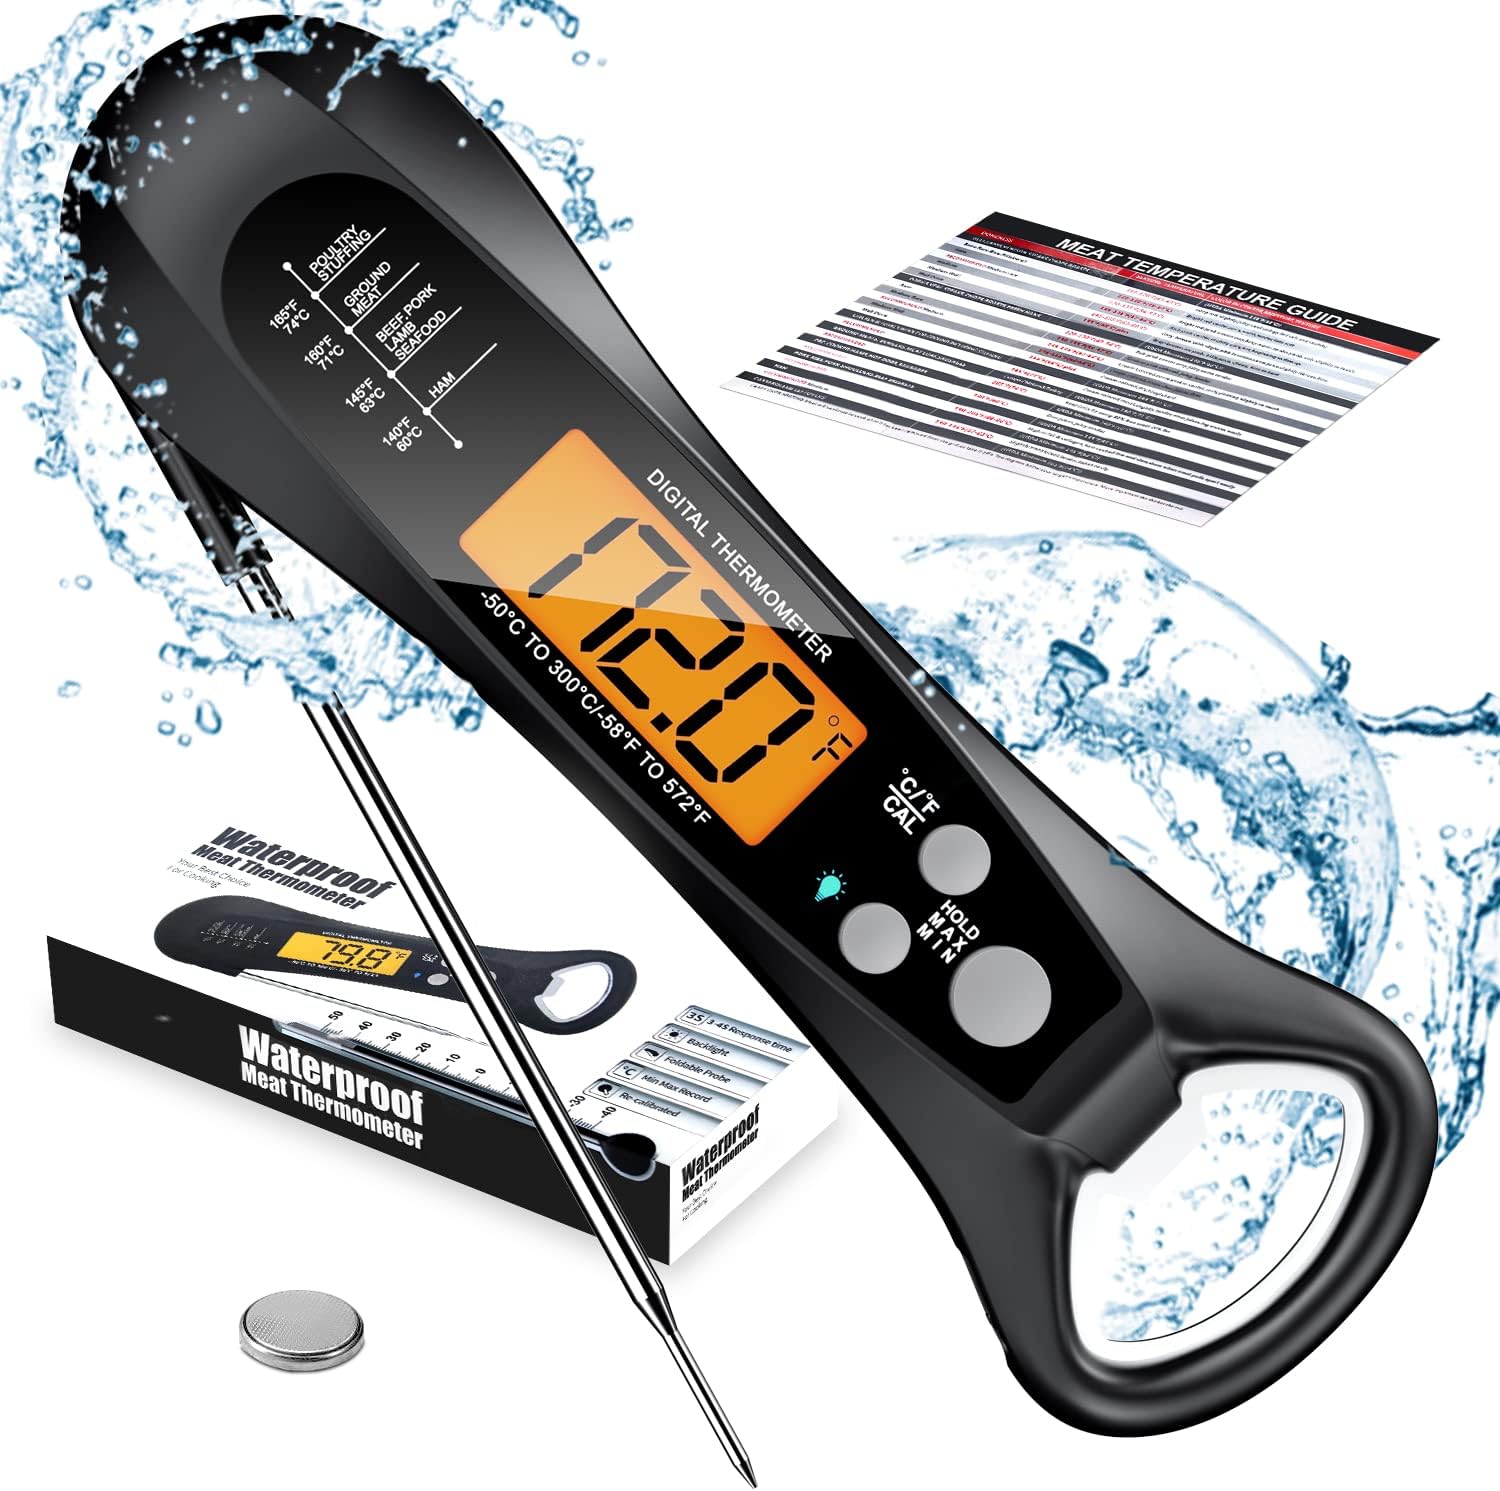 Meat Thermometer Digital, Instant Read Meat ThermometerI for Grill and Cooking, IP66 Waterproof Food Thermometer for Kitchen and Outside, BBQ, Turkey, Candy, Liquids, Beef